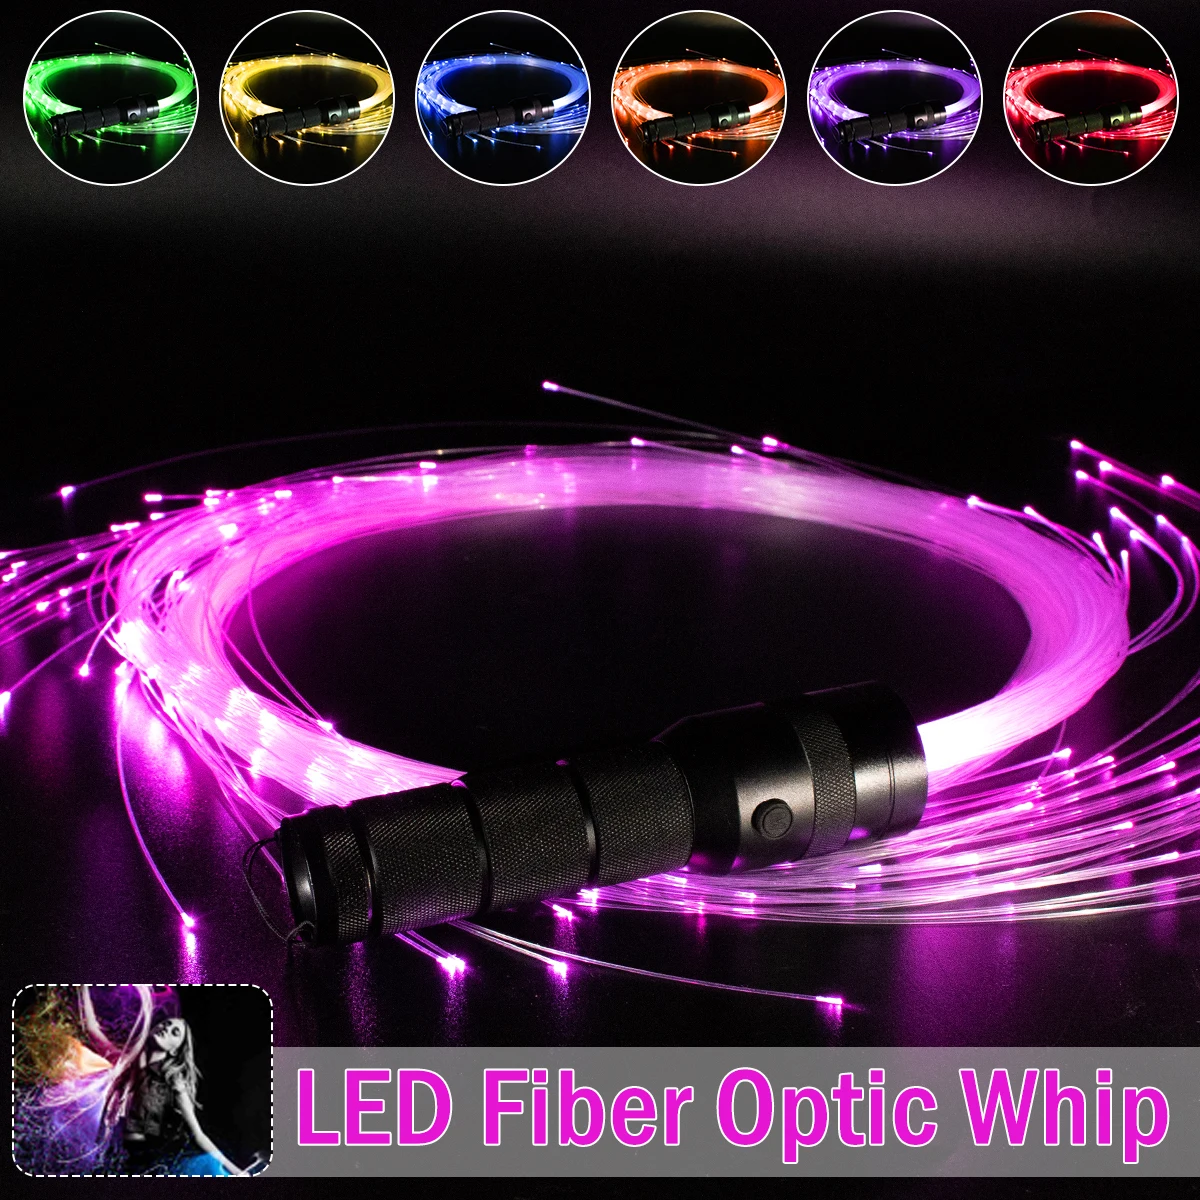 LED Fiber Optic Whip 360 Degree More Modes and Effects Light Up Waving Holiday Parties Lighting Fiber Optic Dance Whips 1